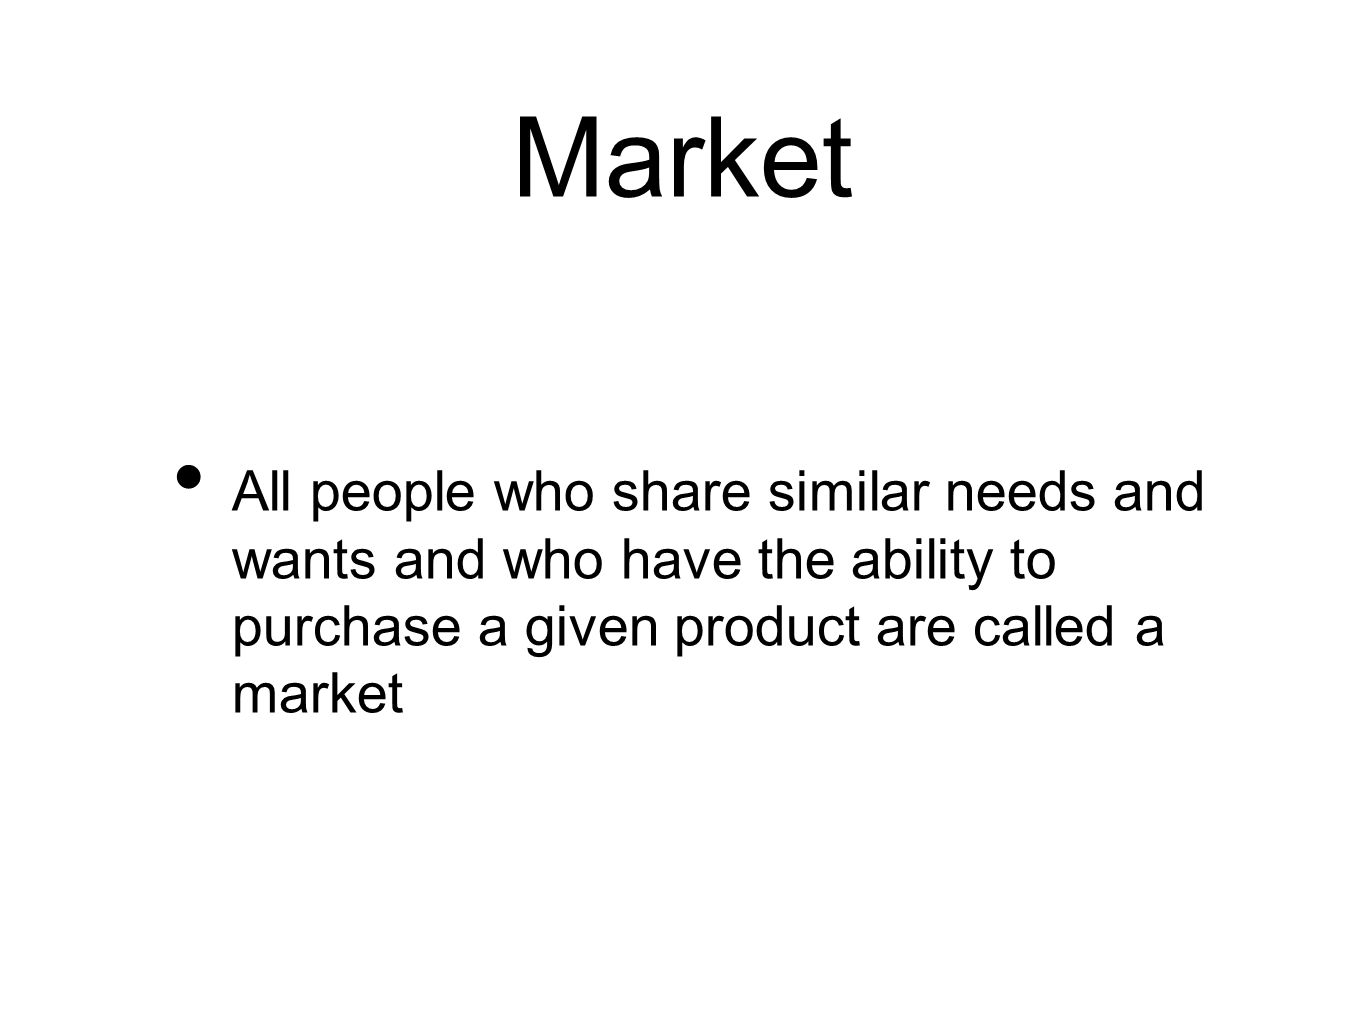 Market All people who share similar needs and wants and who have the ability to purchase a given product are called a market